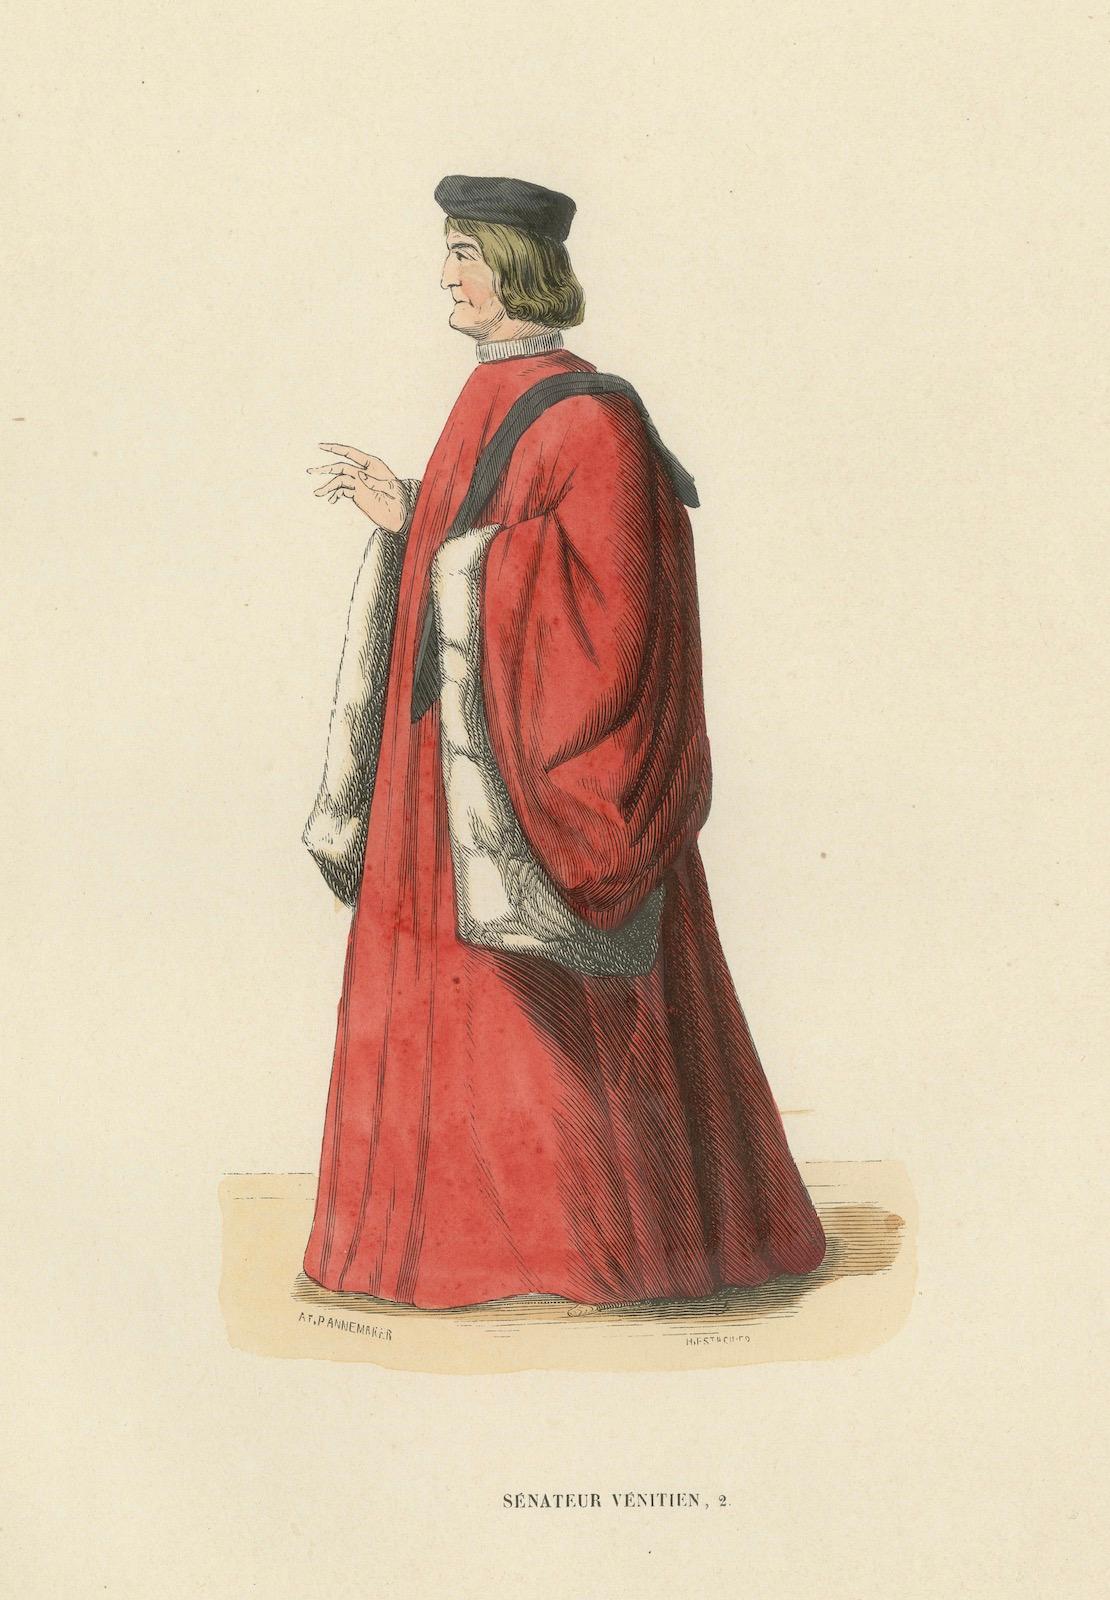 Mid-19th Century Eminent Venetian Senator in Traditional Robes: A Portrayal of Political Prestige For Sale